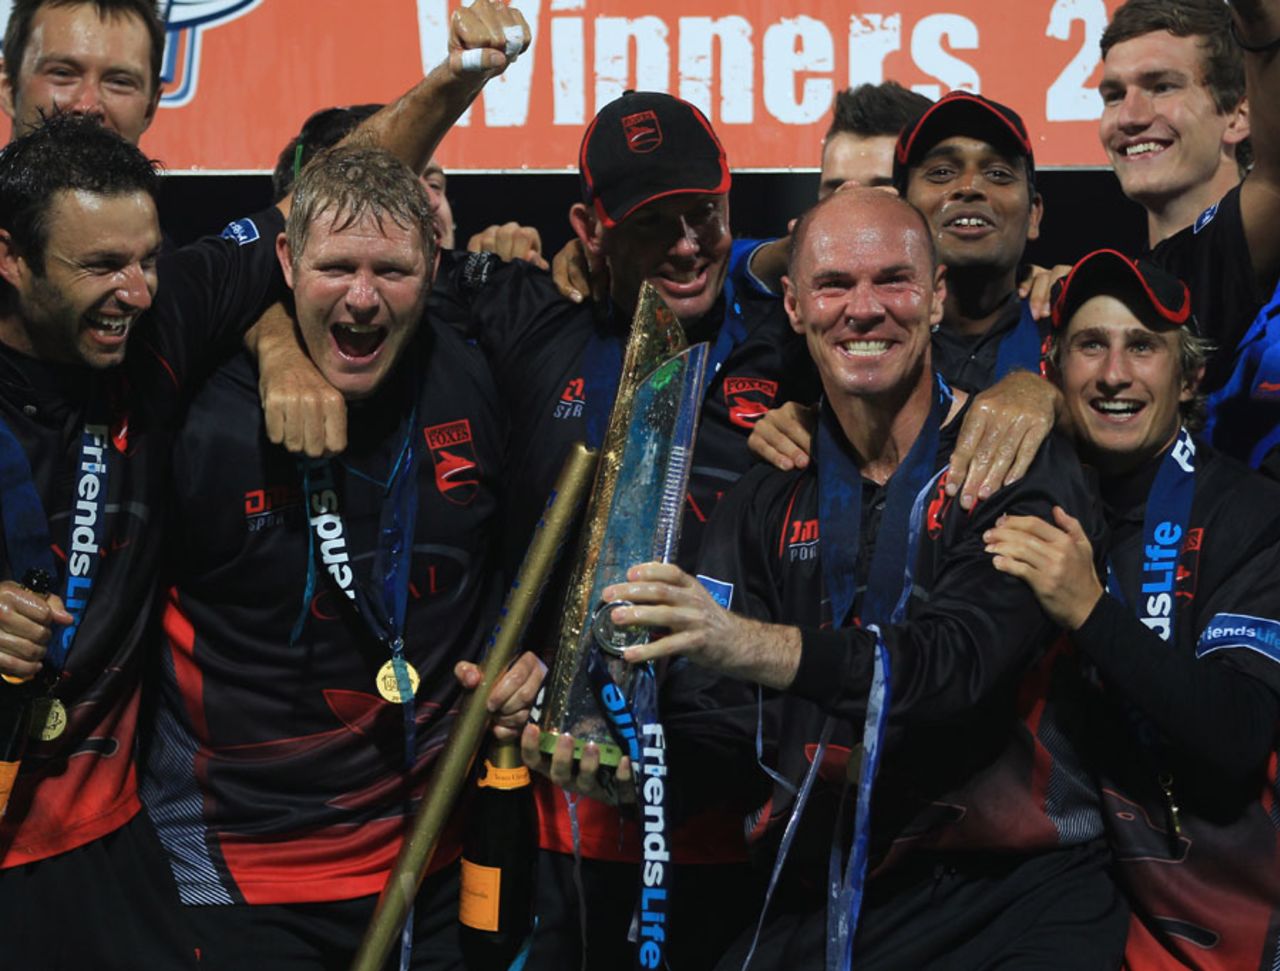 Leicestershire's players, including Matthew Hoggard, Paul Nixon and James Taylor, celebrate victory, Leicestershire v Somerset, Final, Friends Life t20, Edgbaston, August 27 2011